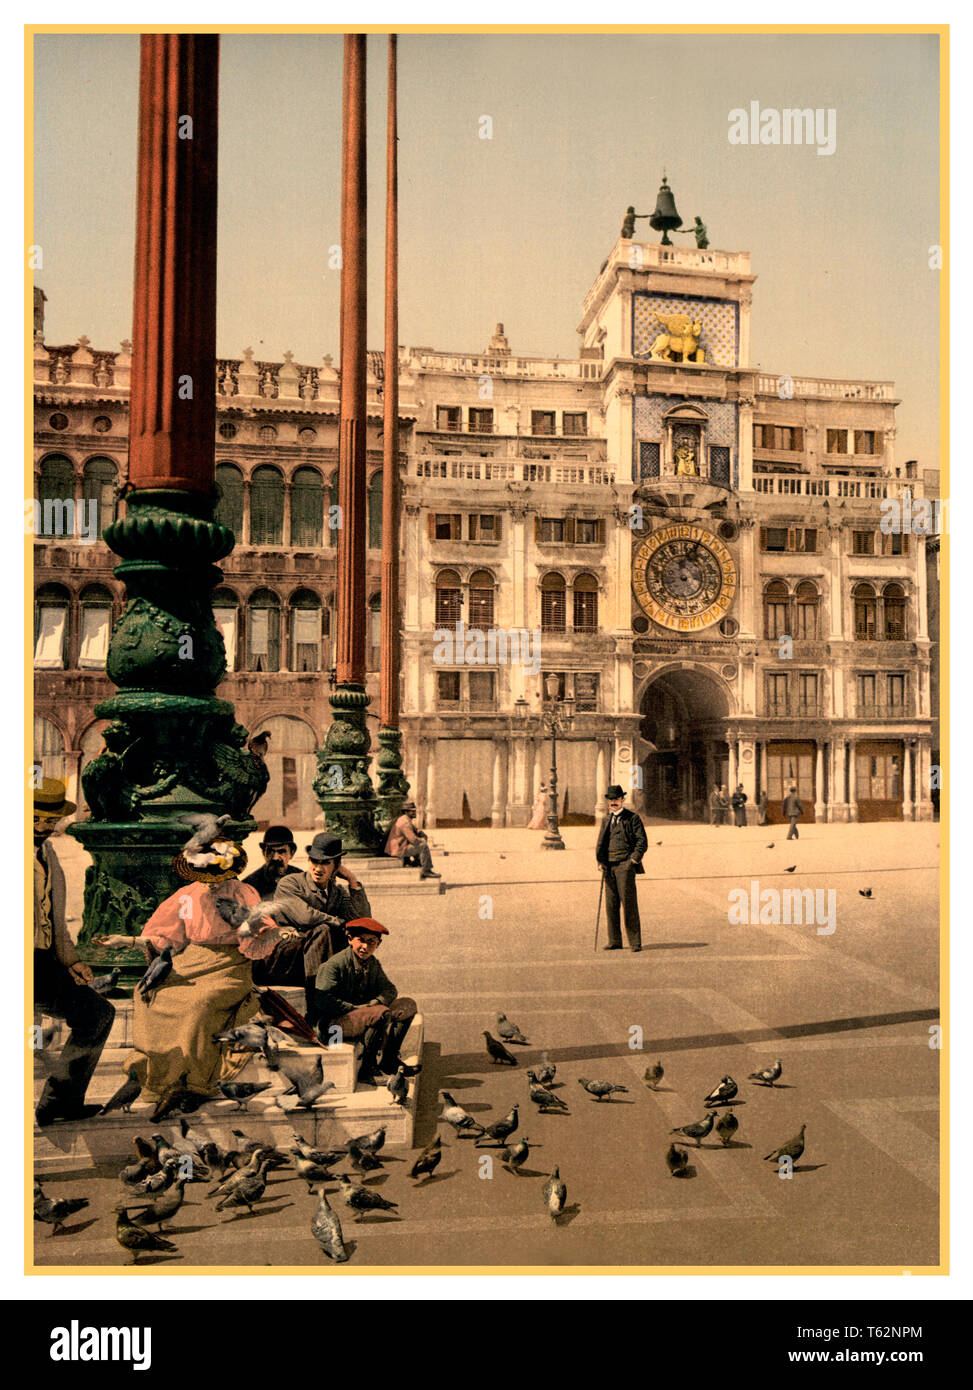 ARCHIVE HISTORIC VENICE 1890’s-1900 Torre dell 'Orologio Clock,VINTAGE VENICE TOURISTS Photochrom Historic Vintage Old Venice St. Mark's Basilica Square Piazza Tourists 1890’s Fashion clothing style and the clock tower 1890-1900 Chromolithograph post colour photochrom printing technique Photochrom image St. Mark's Square and Torre dell 'Orologio Clock, Venice, Italy 1900 Stock Photo